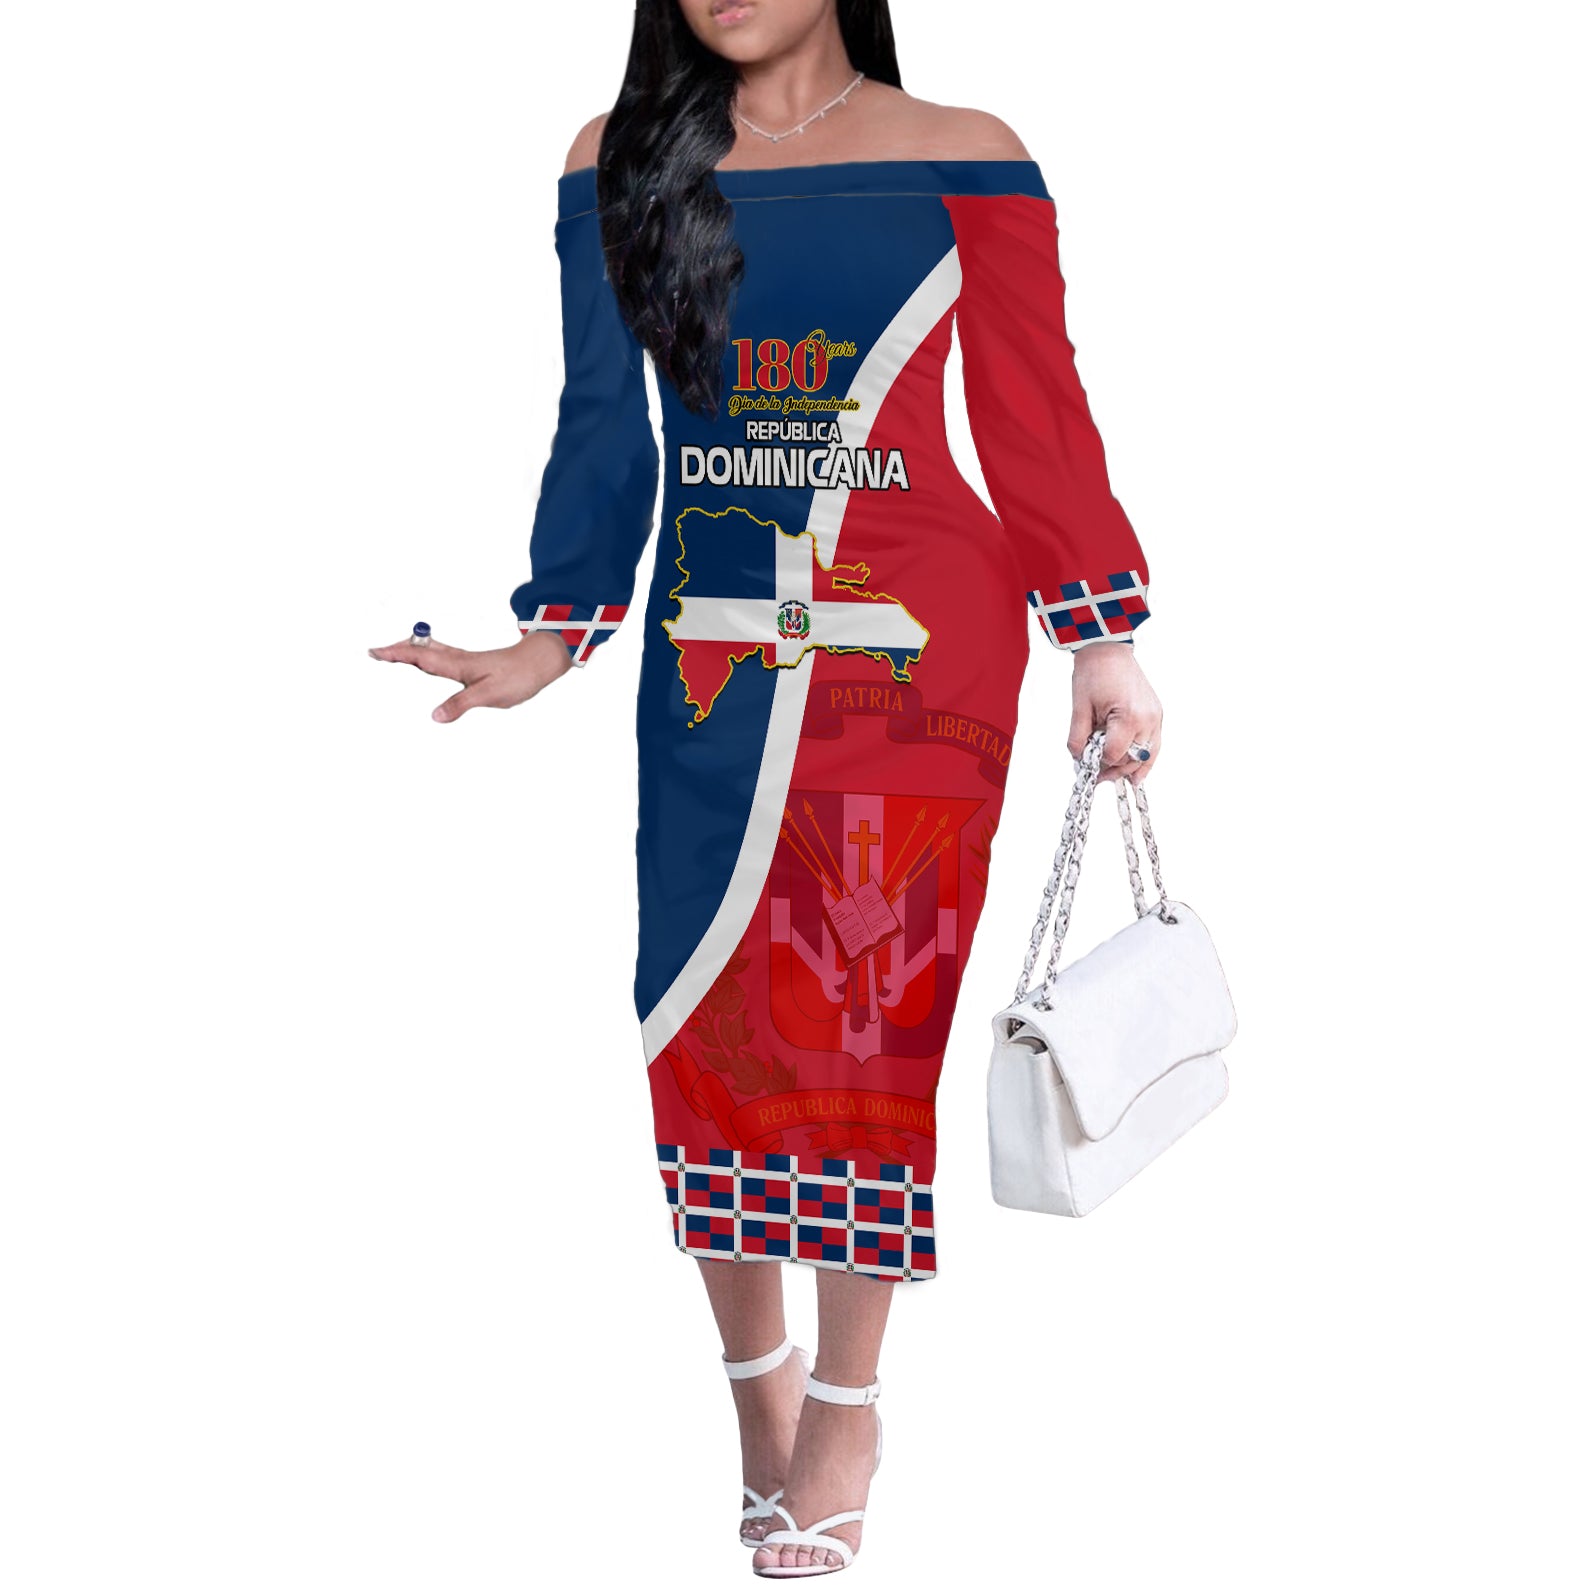 dominican-republic-180th-years-independence-day-personalized-off-the-shoulder-long-sleeve-dress